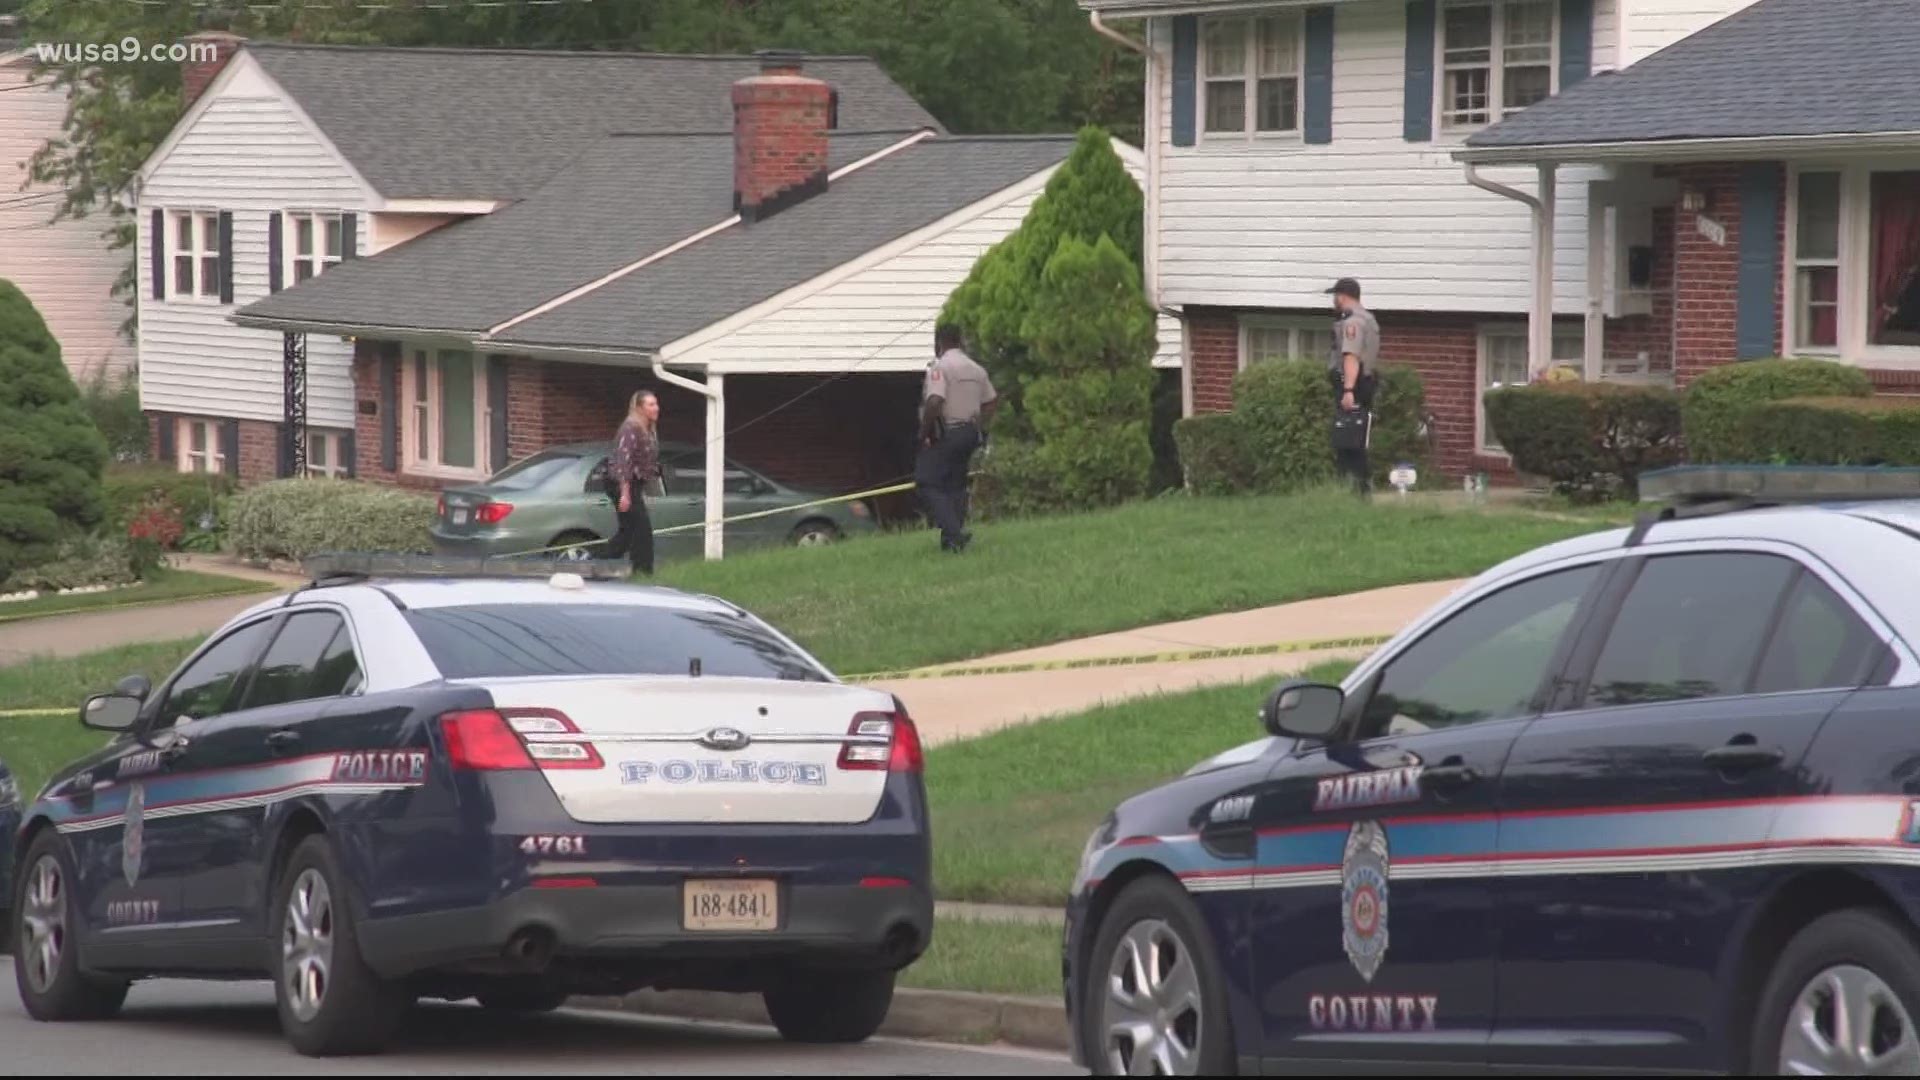 Fairfax County Police shot a woman in the stomach on Gosport Lane in Springfield yesterday after police say she ran at officers while holding a large knife.